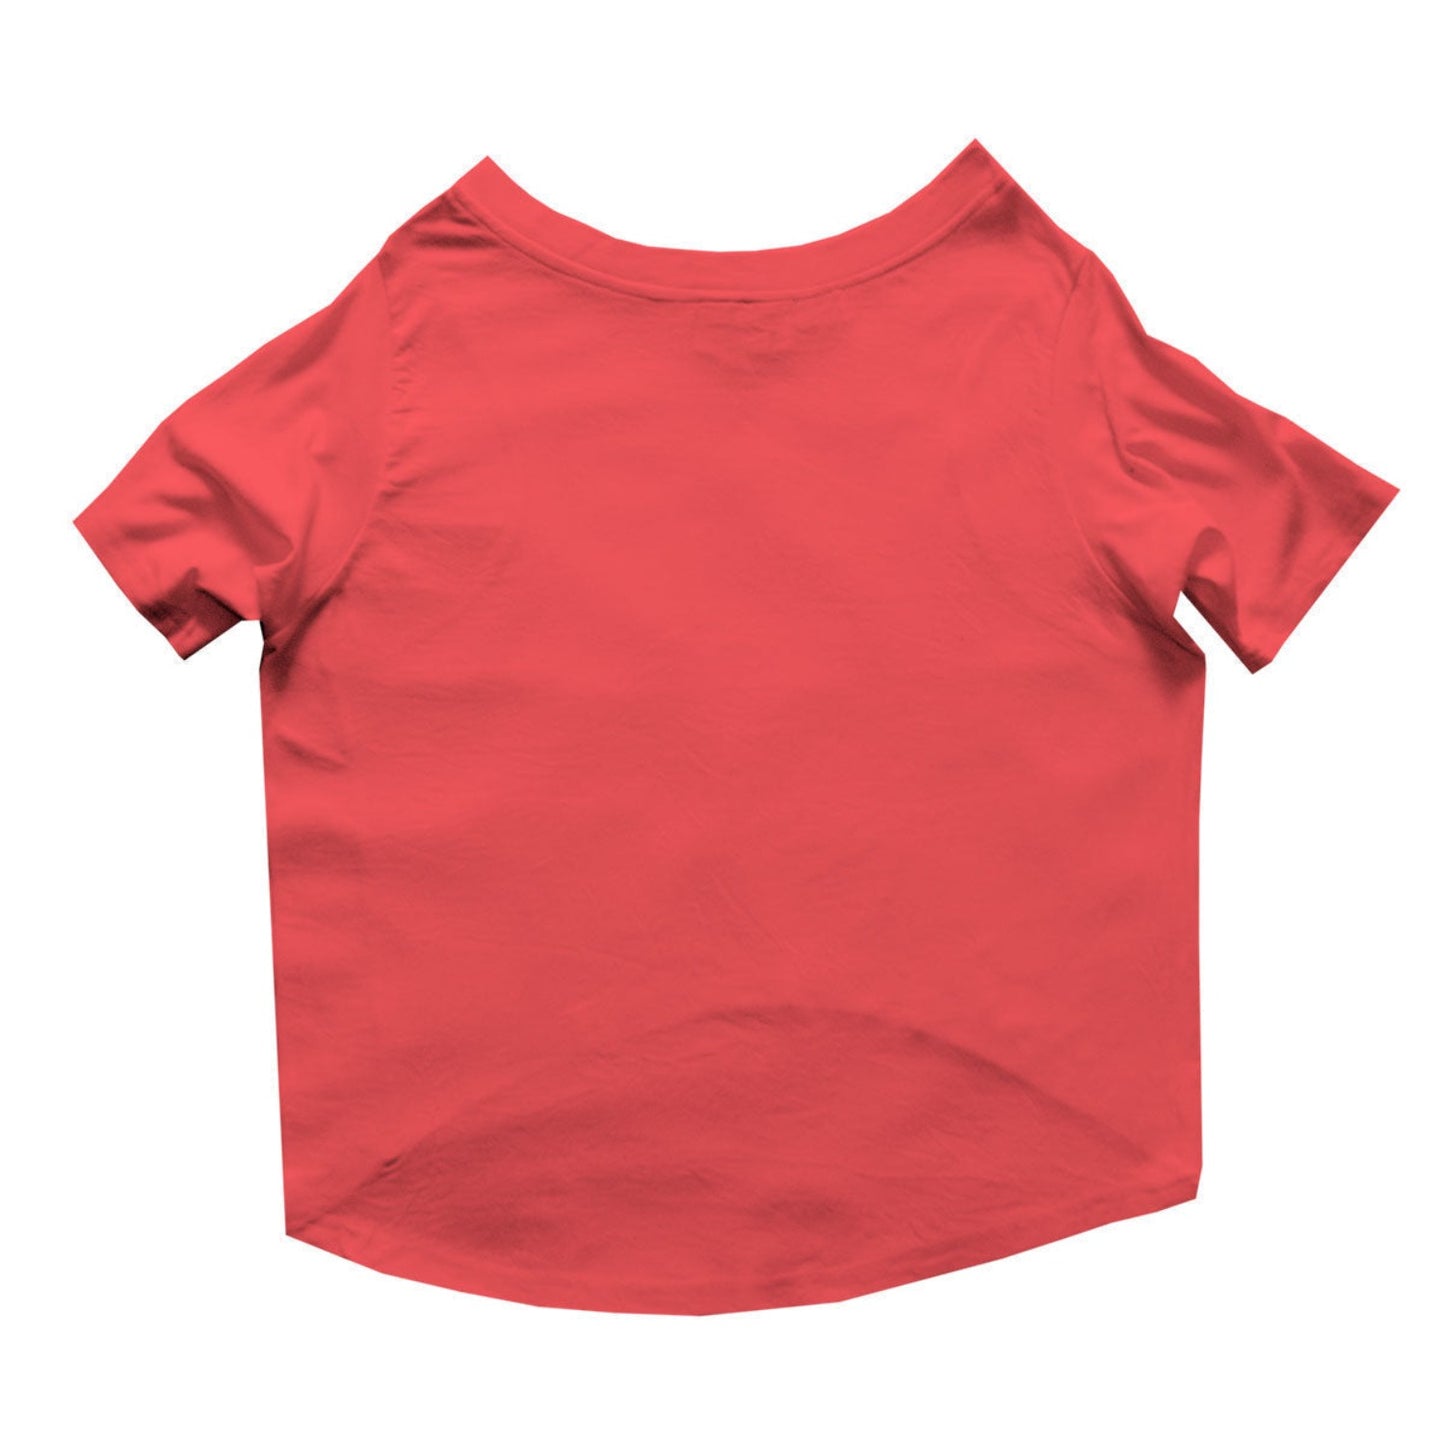 Ruse / Poppy Red Ruse Basic Crew Neck "Burger Scooter" Printed Half Sleeves Dog Tee18